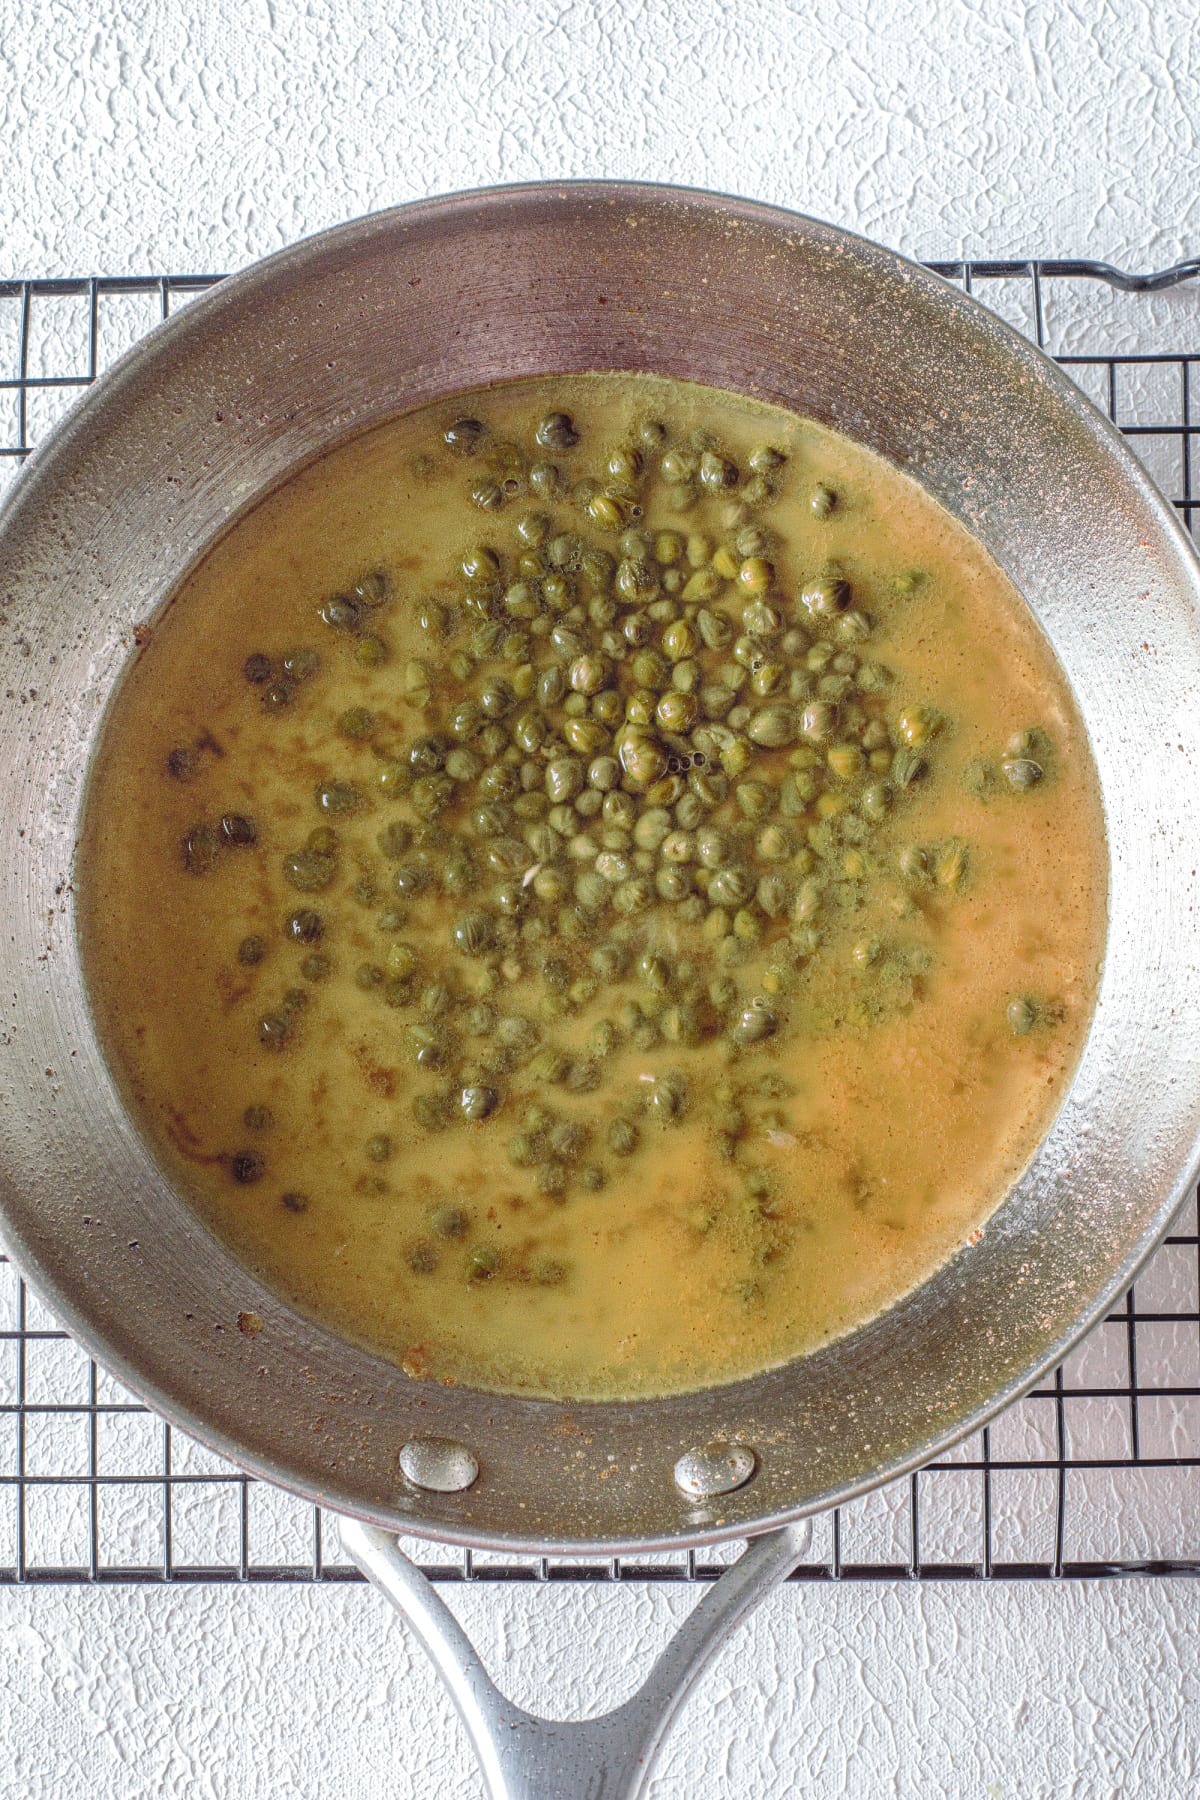 Capers in pan with chicken stock and lemon juice